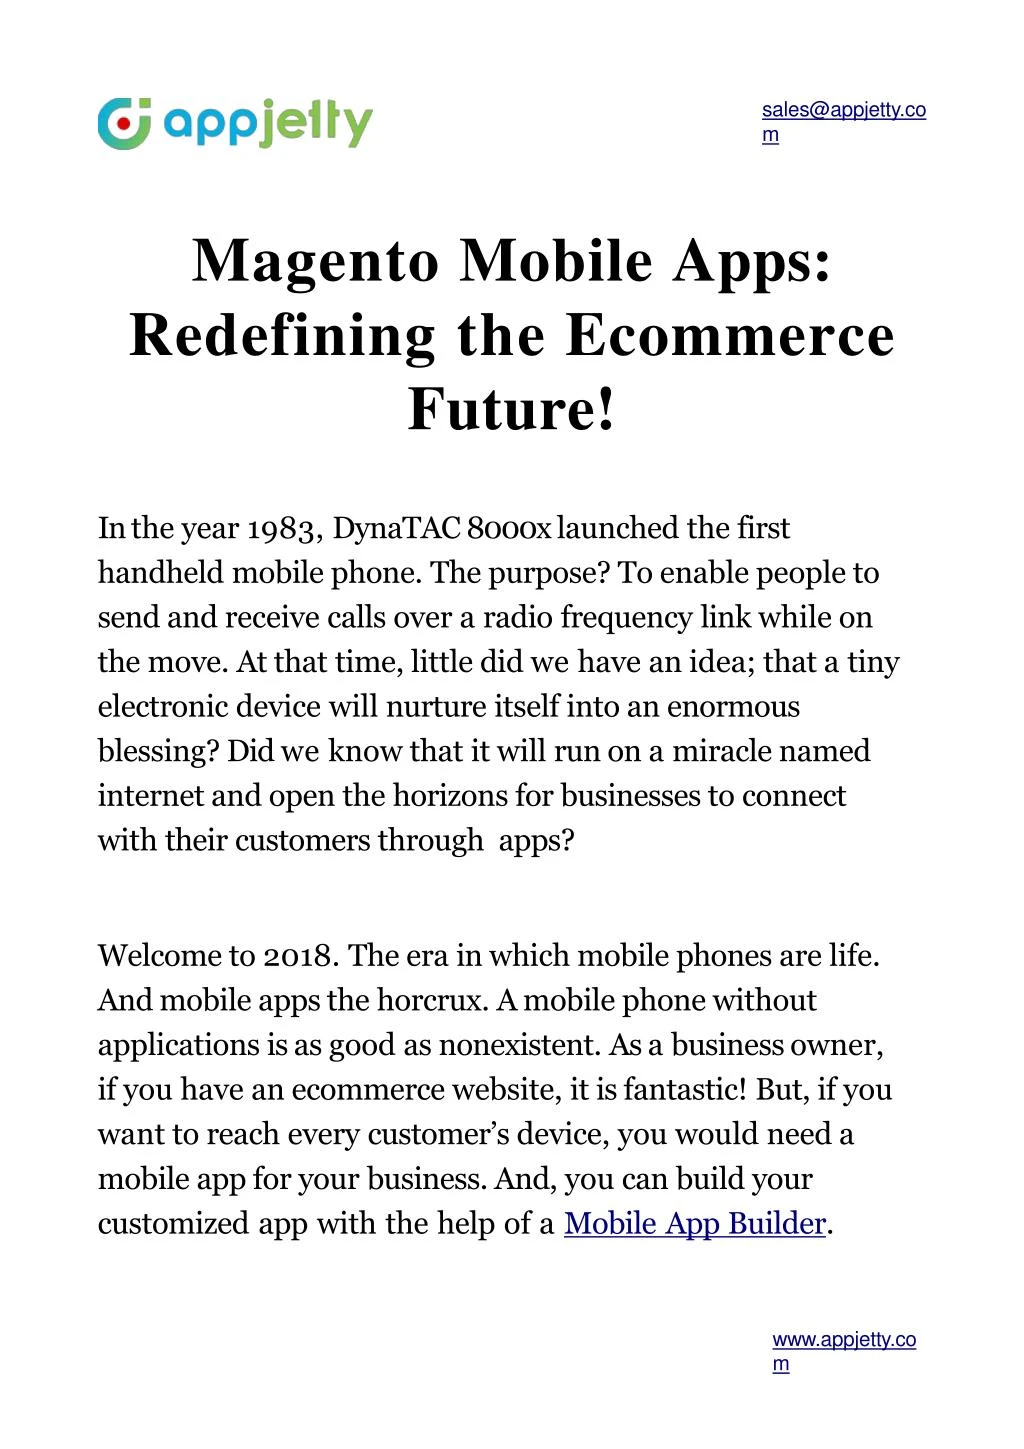 magento mobile apps redefining the ecommerce future